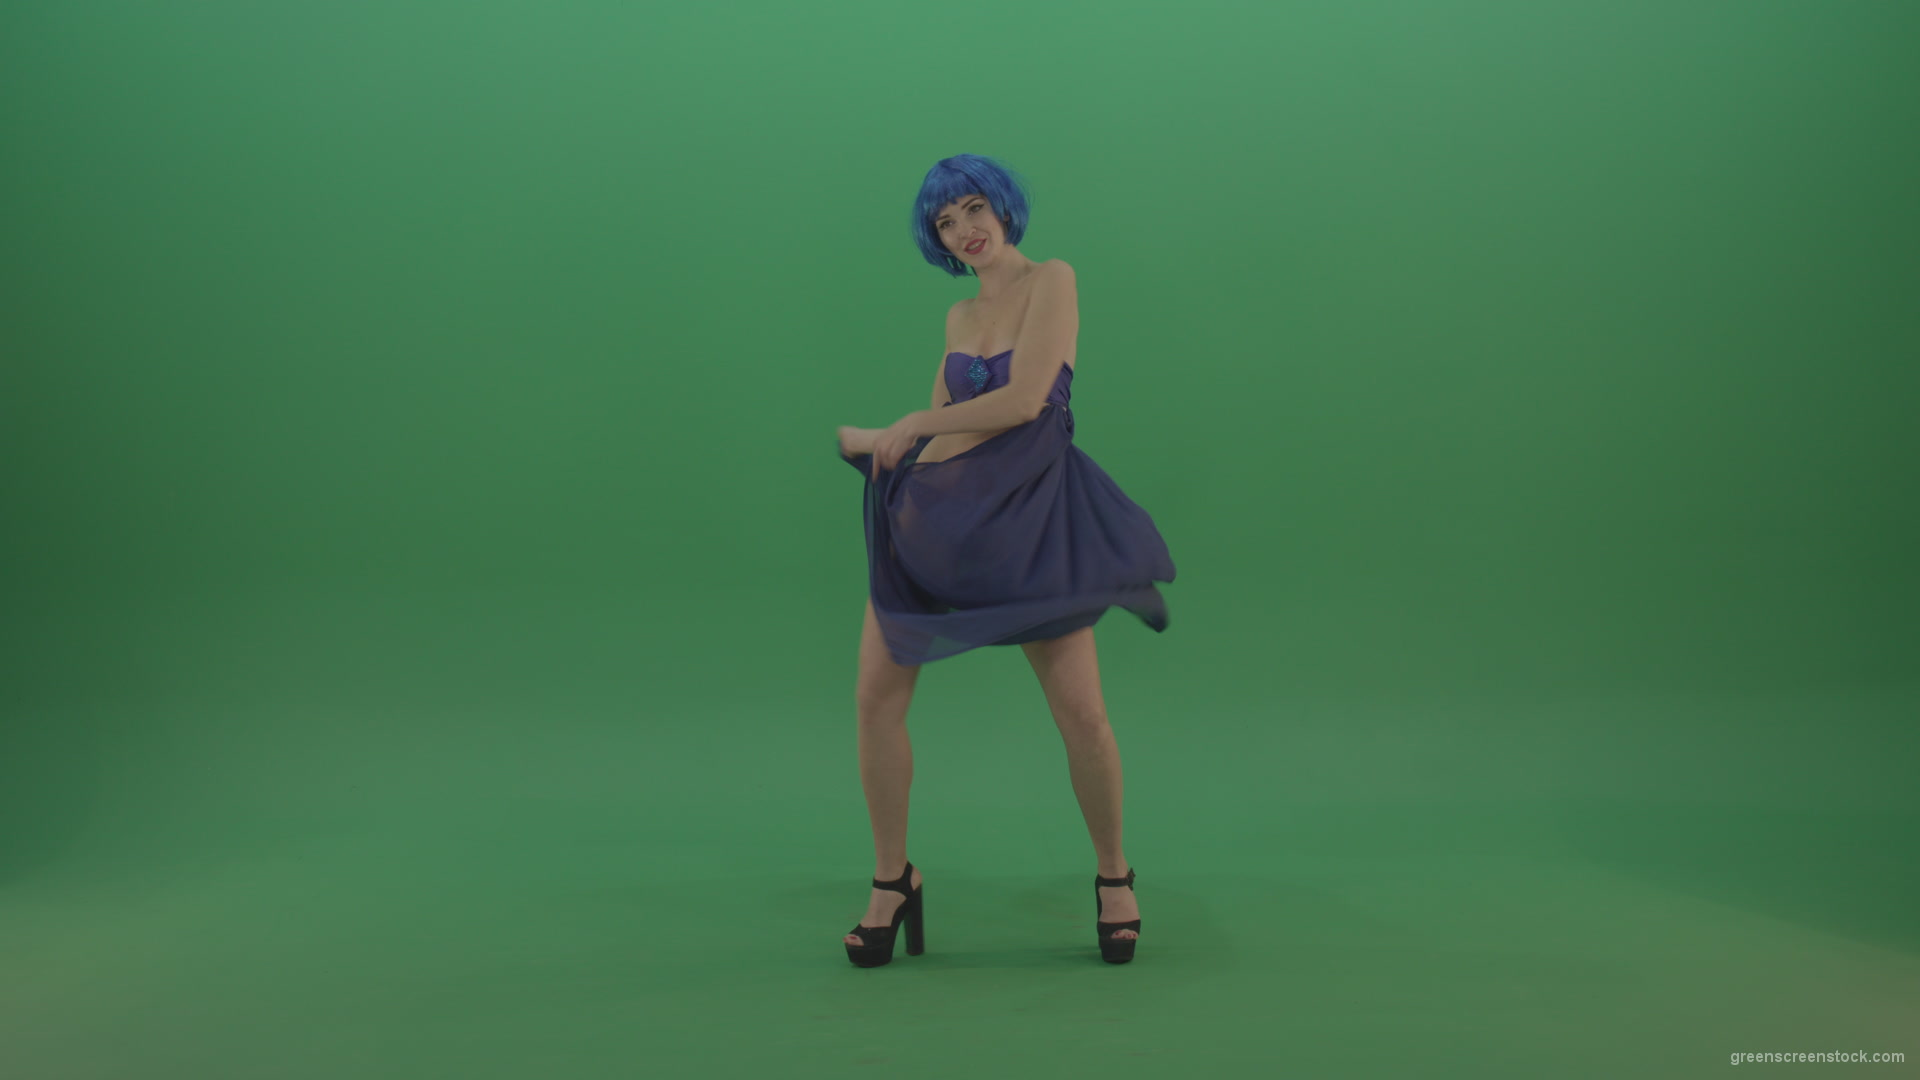 Full-size-erotic-young-girl-dancing-go-go-with-blue-dress-curtain-on-green-screen_001 Green Screen Stock